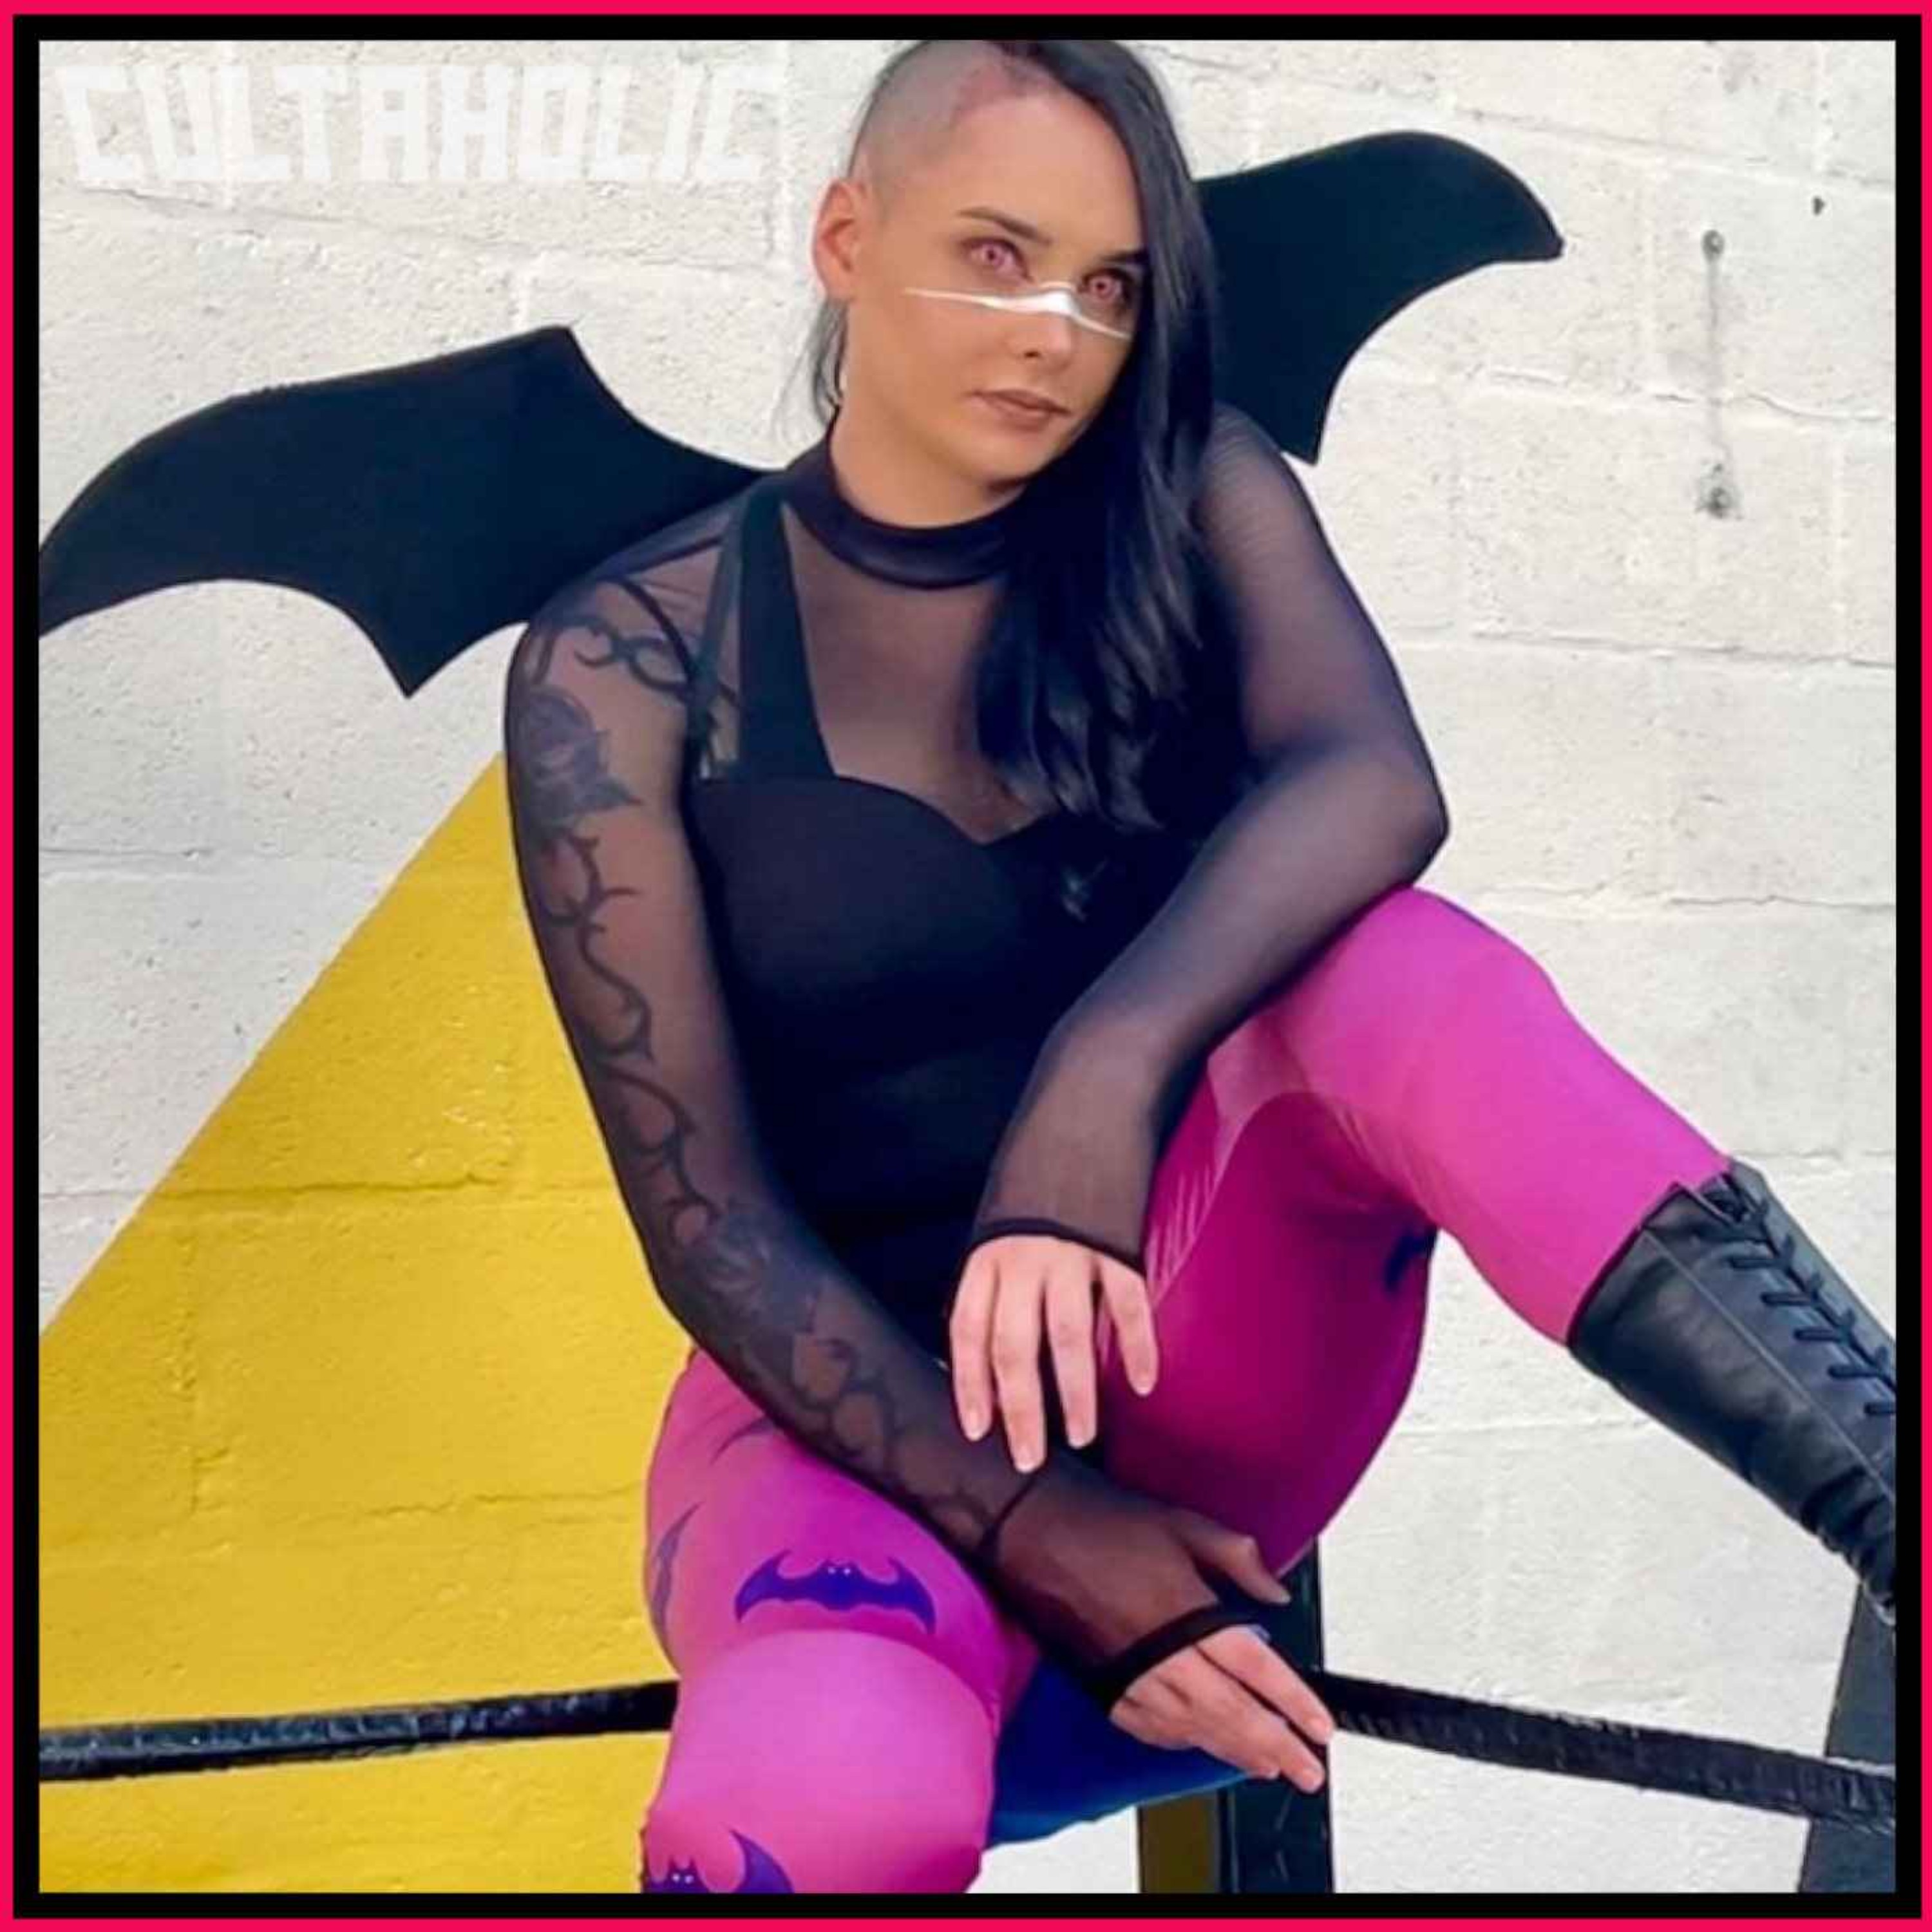 Meet SUCCUBUS, the Wrestler with 100K Instagram Followers and OVER 30 MILLION TikTok Views...but has only had ONE Match!